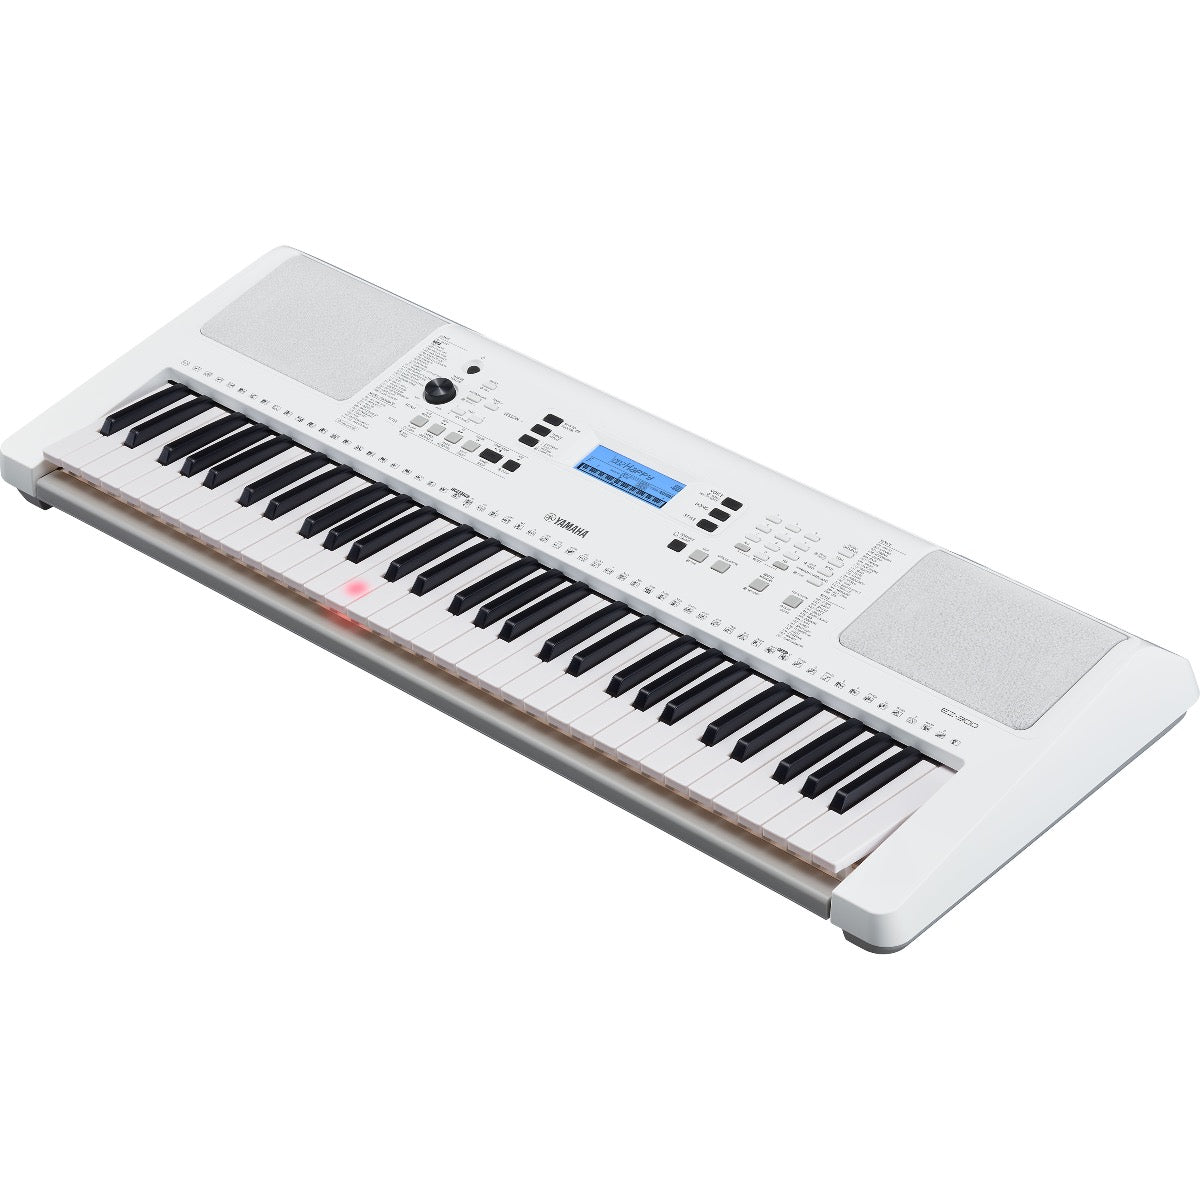 3/4 view of Yamaha EZ-300 Portable Keyboard showing top, front and right side